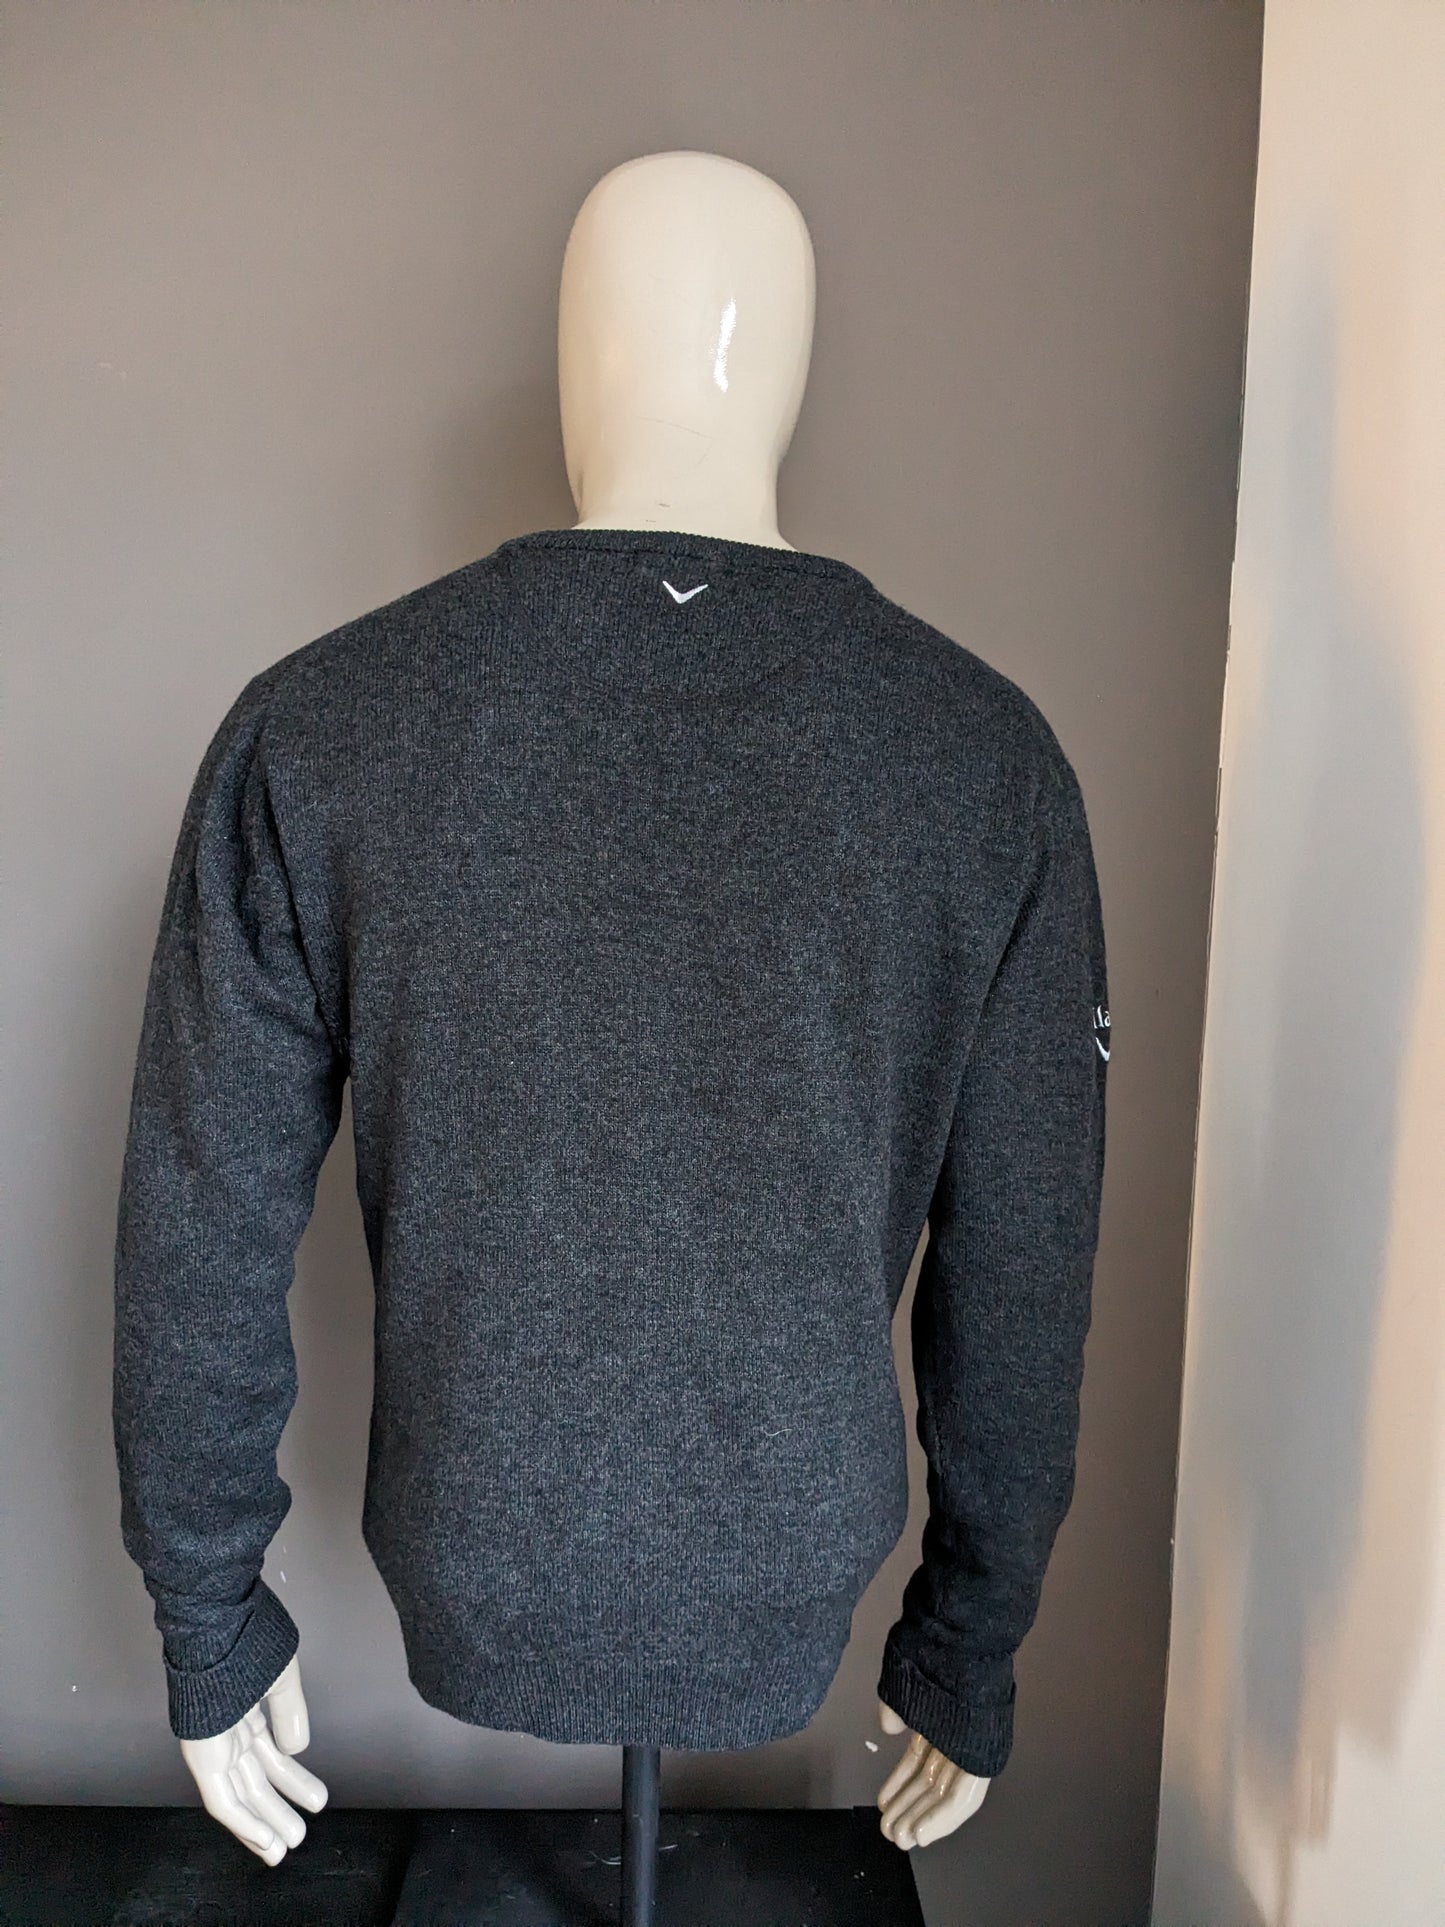 Callaway woolen sweater with V-neck. Dark gray mixed. Size S.